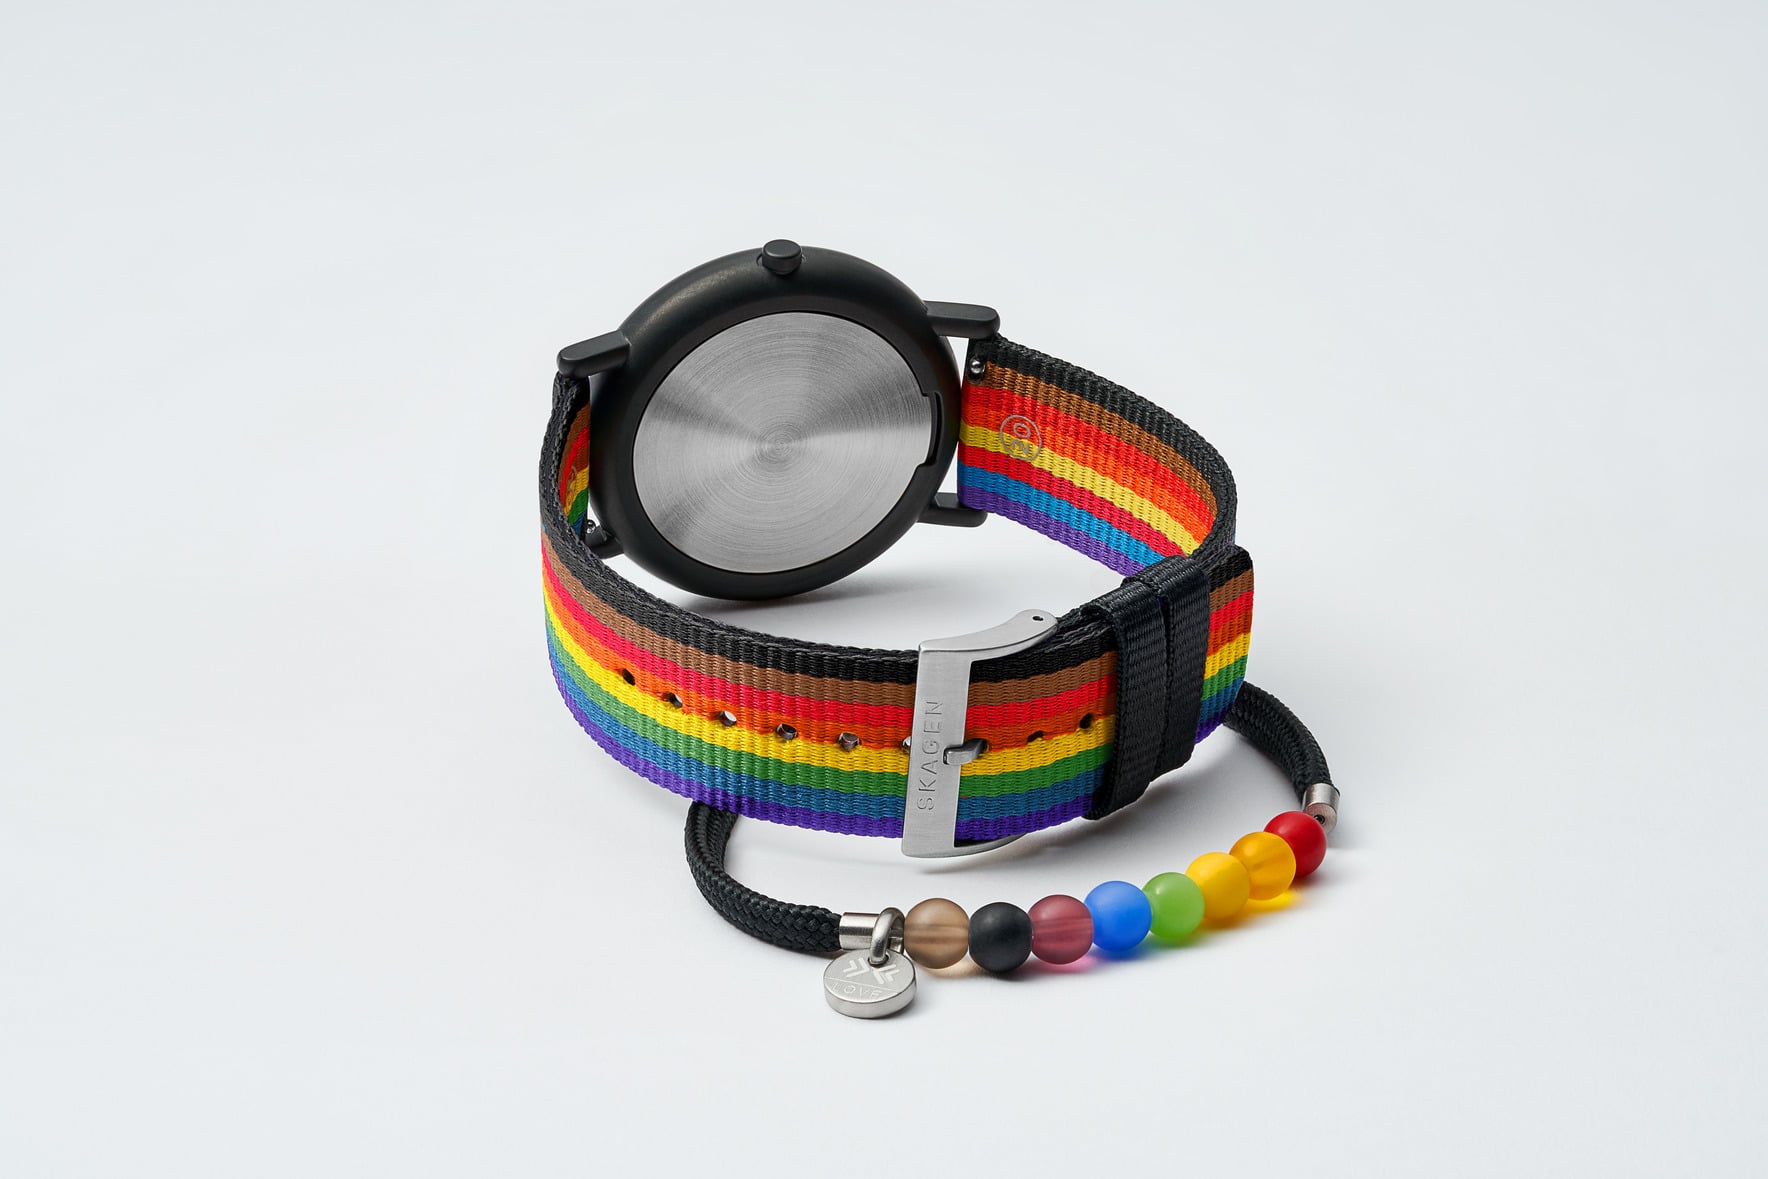 Skagen's Pride collection also features an interchangeable strap and a beaded bracelet.